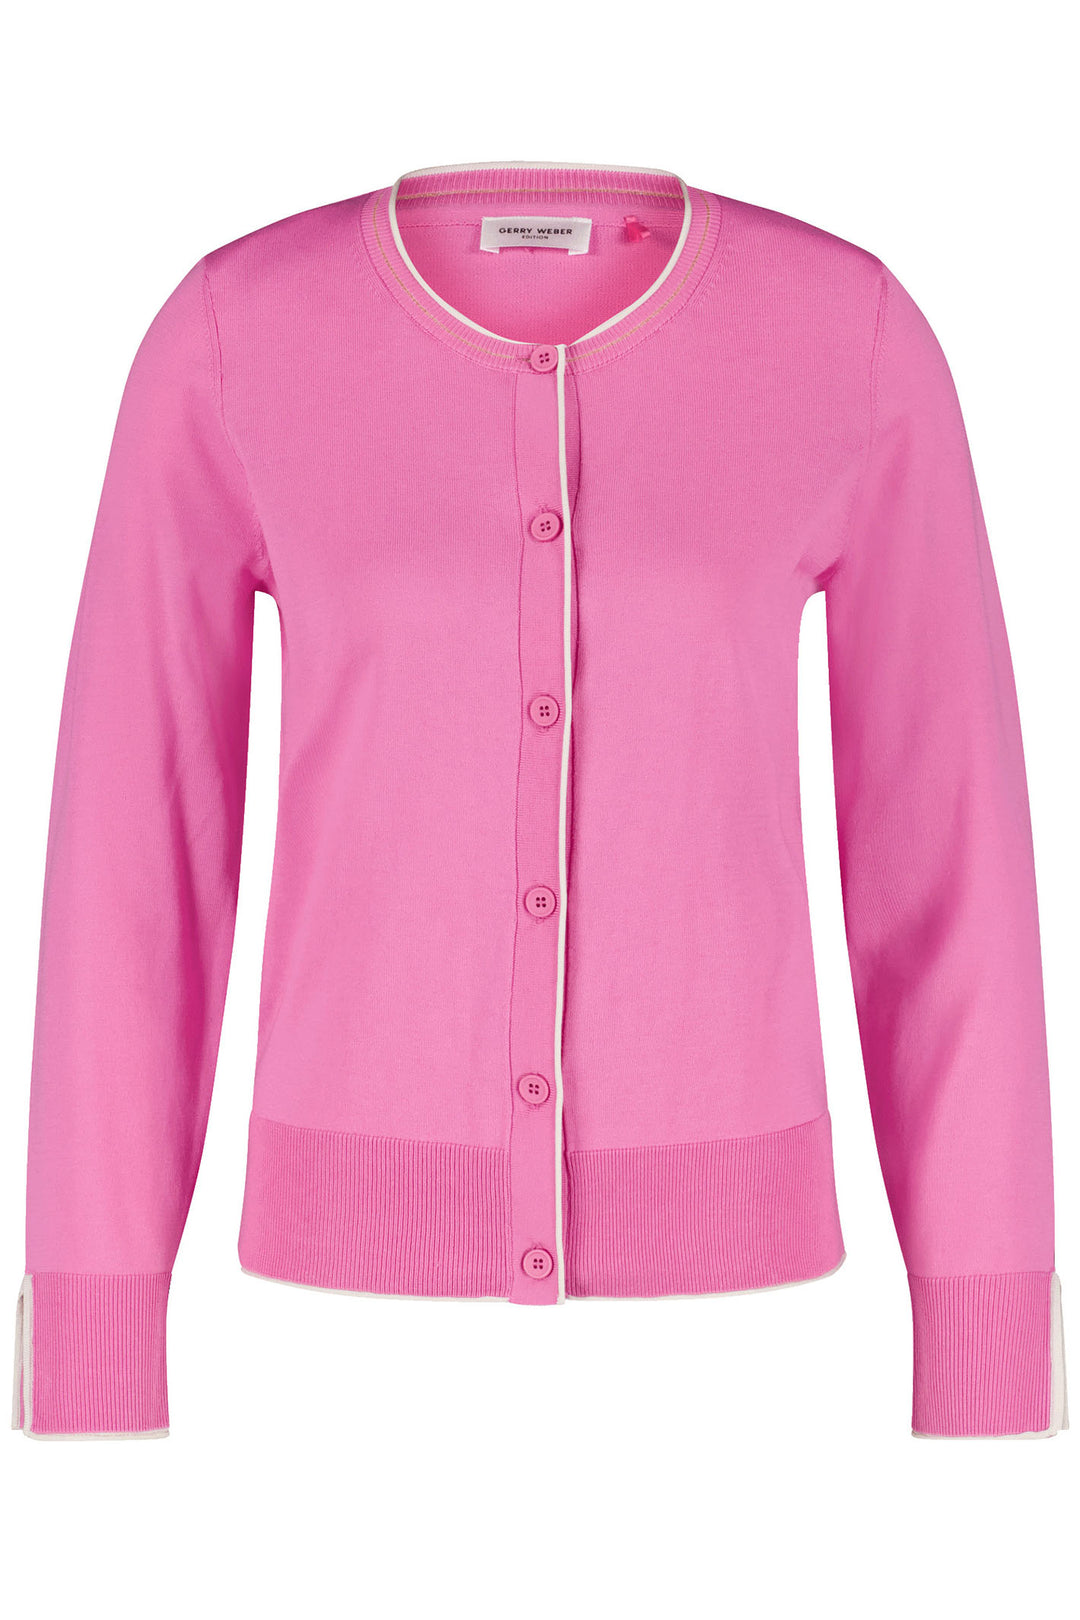 Gerry Weber 230209 Aurora Pink Piped Edge Cardigan - Experience Boutique